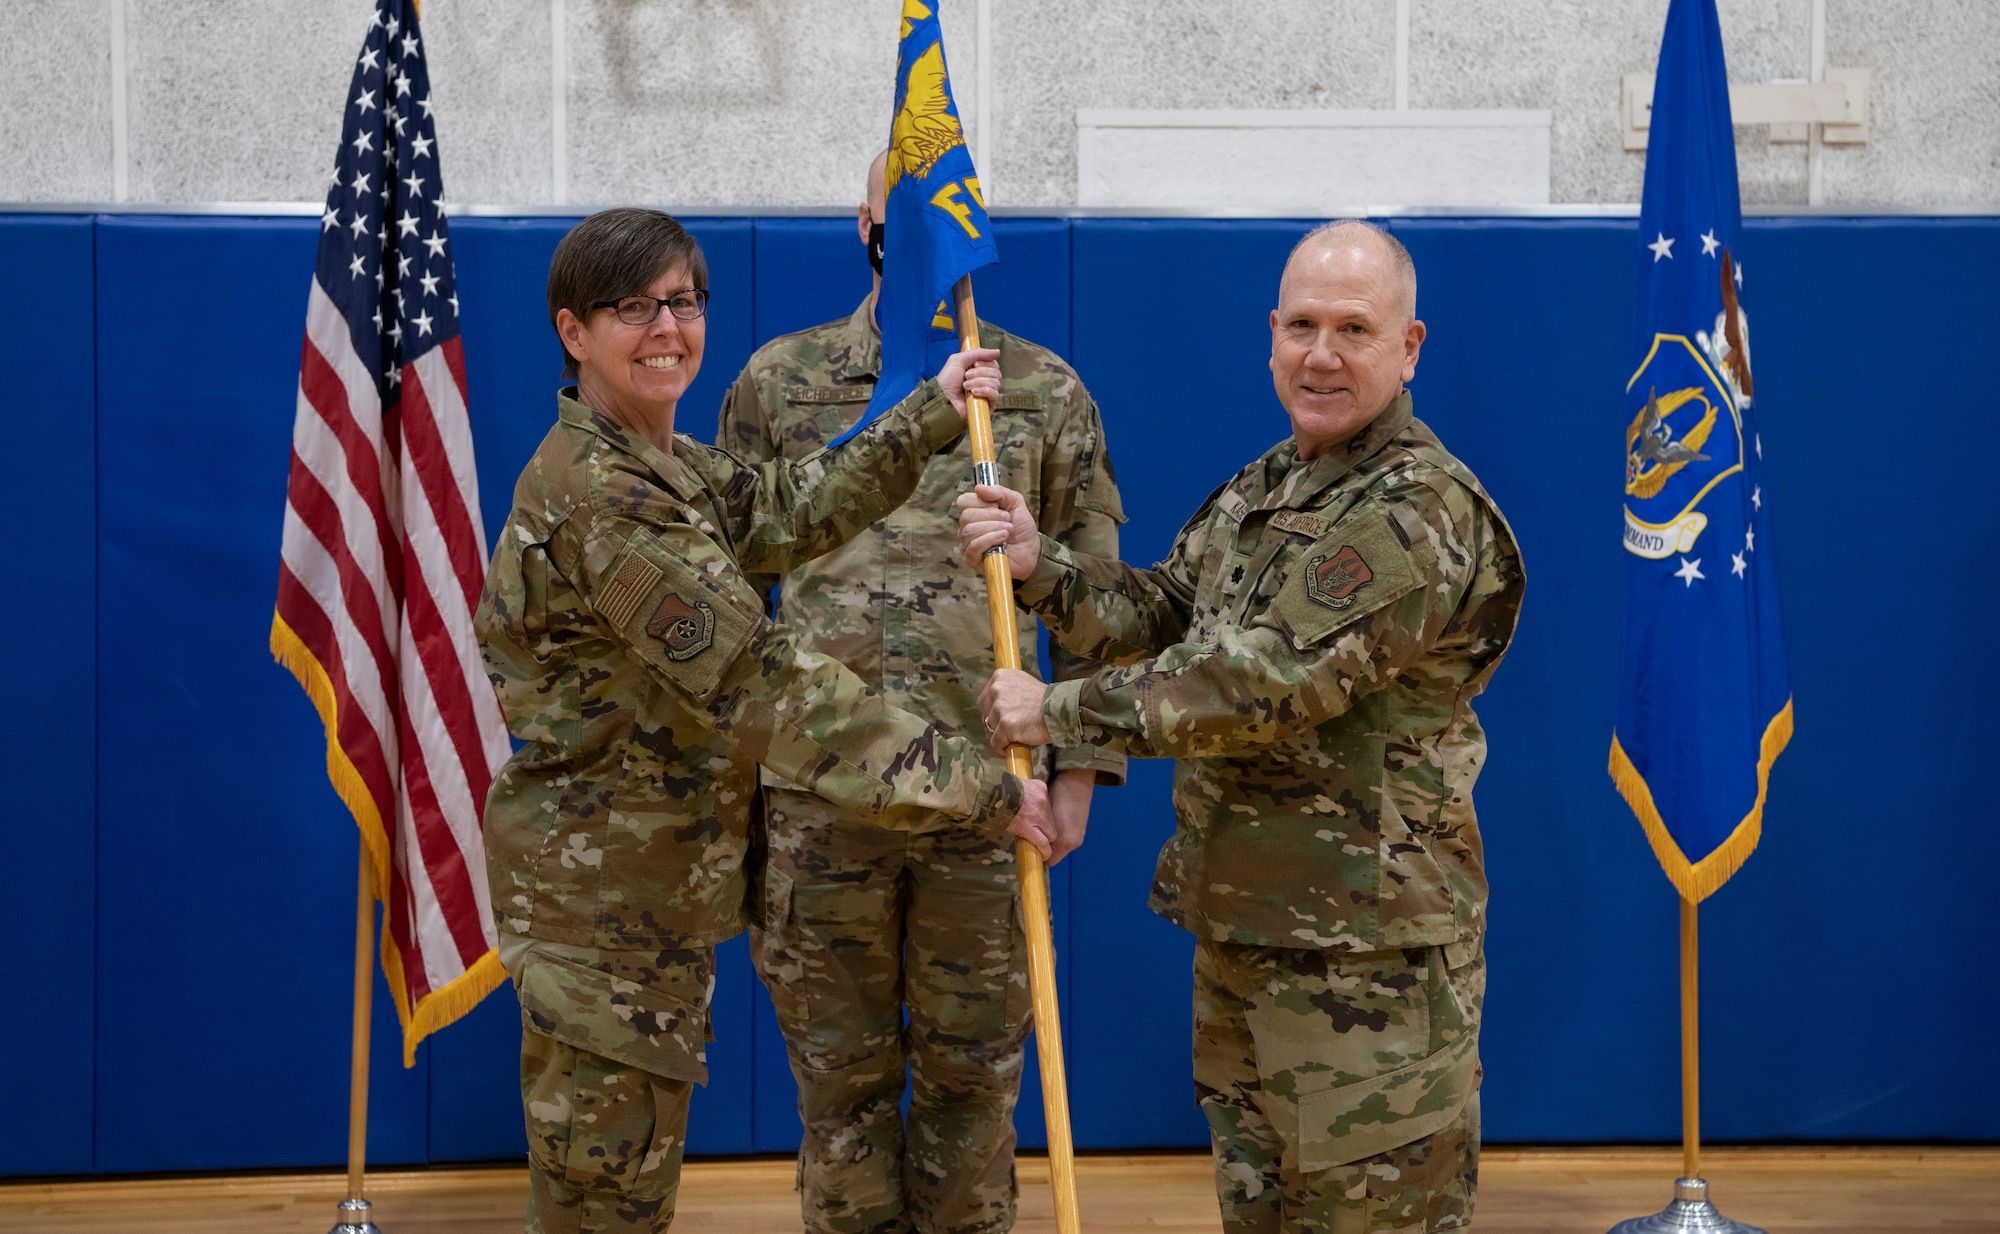 Col. Gretchen Wiltse, 434th Mission Support Group commander, passes the guidon to Lt. Col. Eric Kase, 434th Force Support Squadron commander, during an assumption of command ceremony at Grissom Air Reserve Base, Ind., Dec. 5, 2020. Kase assumed command of the 434th FSS from Lt. Col. Scott Uselding. (U.S. Air Force photo by Staff Sgt. Michael Hunsaker)